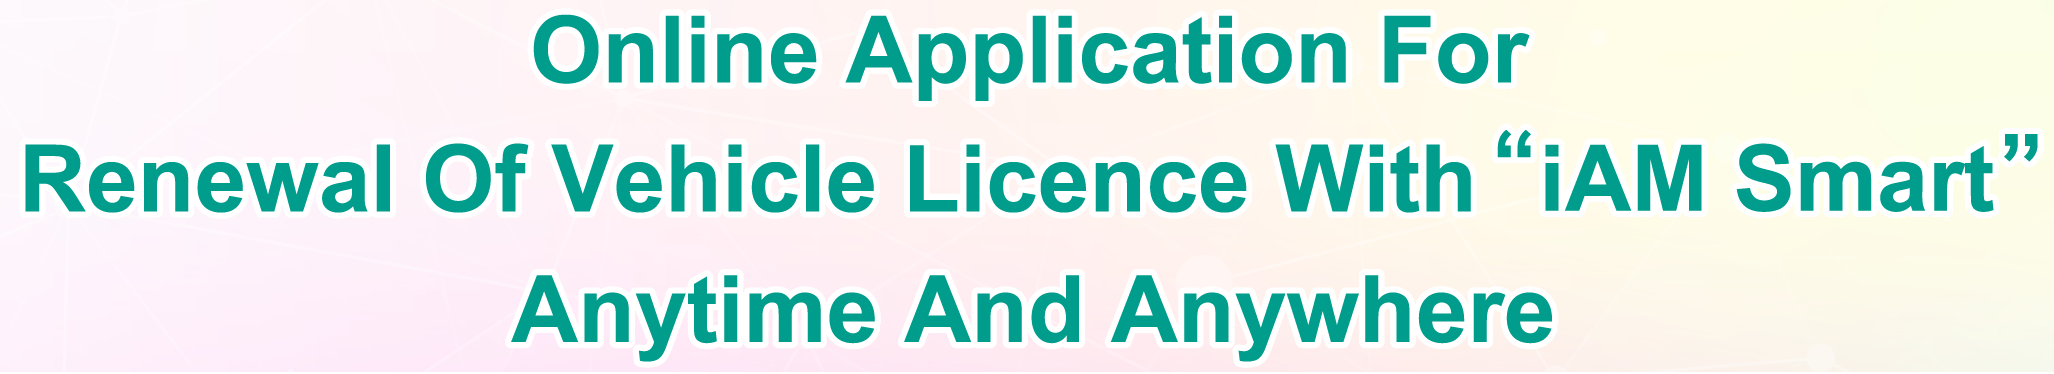 Online Application for Renewal of Vehicle Licence